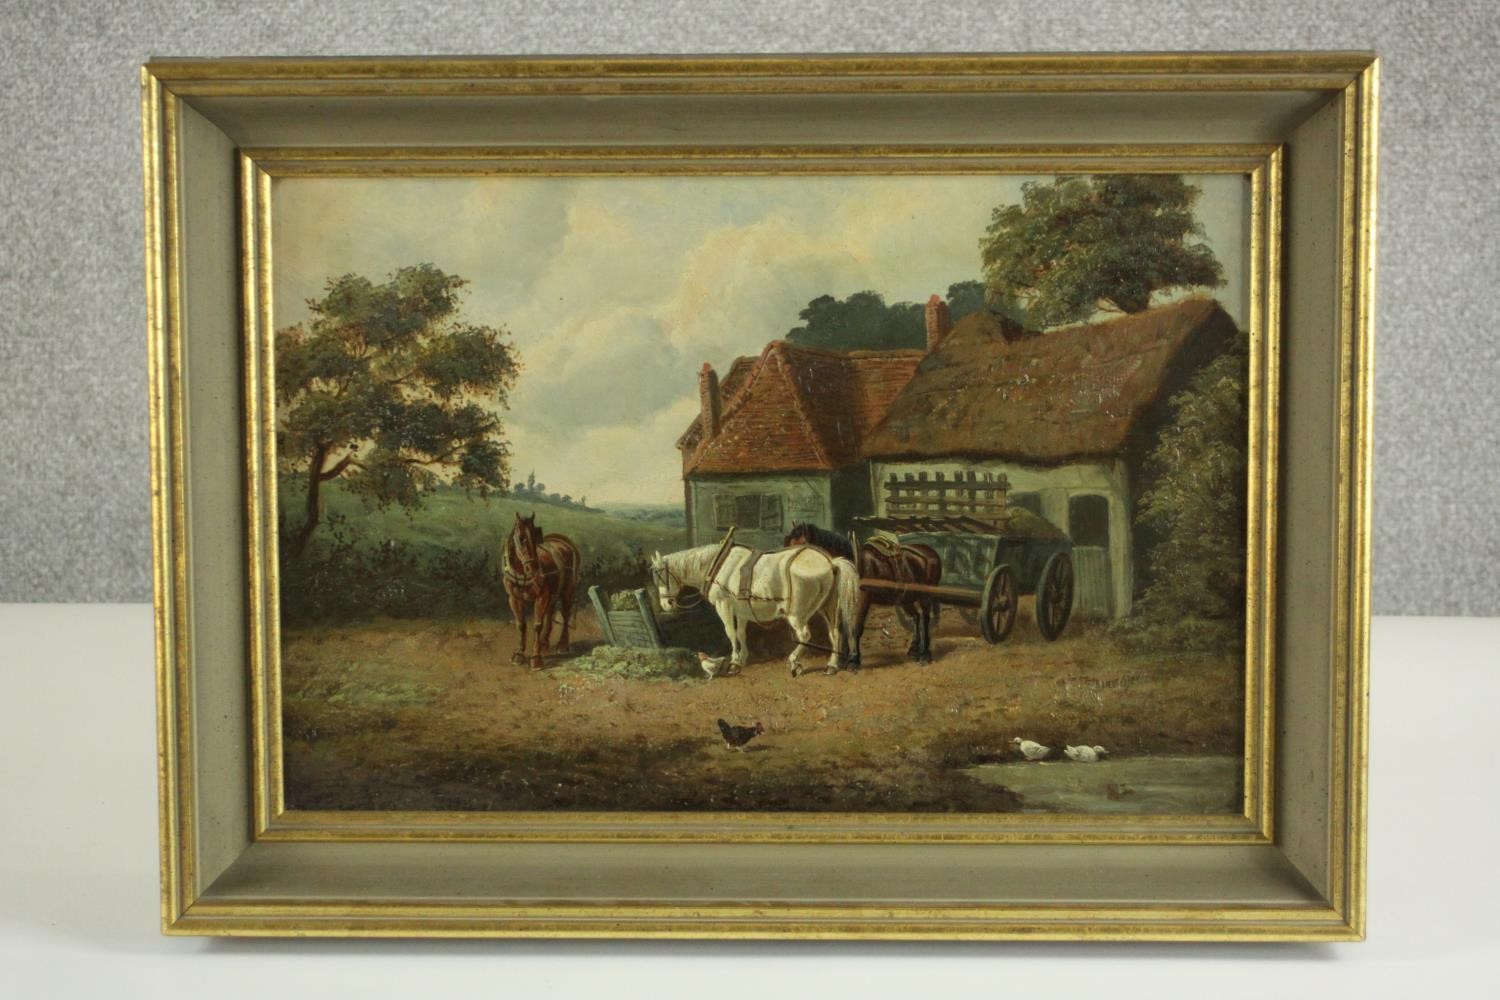 A framed 19th century oil on canvas of cart horses with cart and ducks in front of a farmhouse, - Image 2 of 7